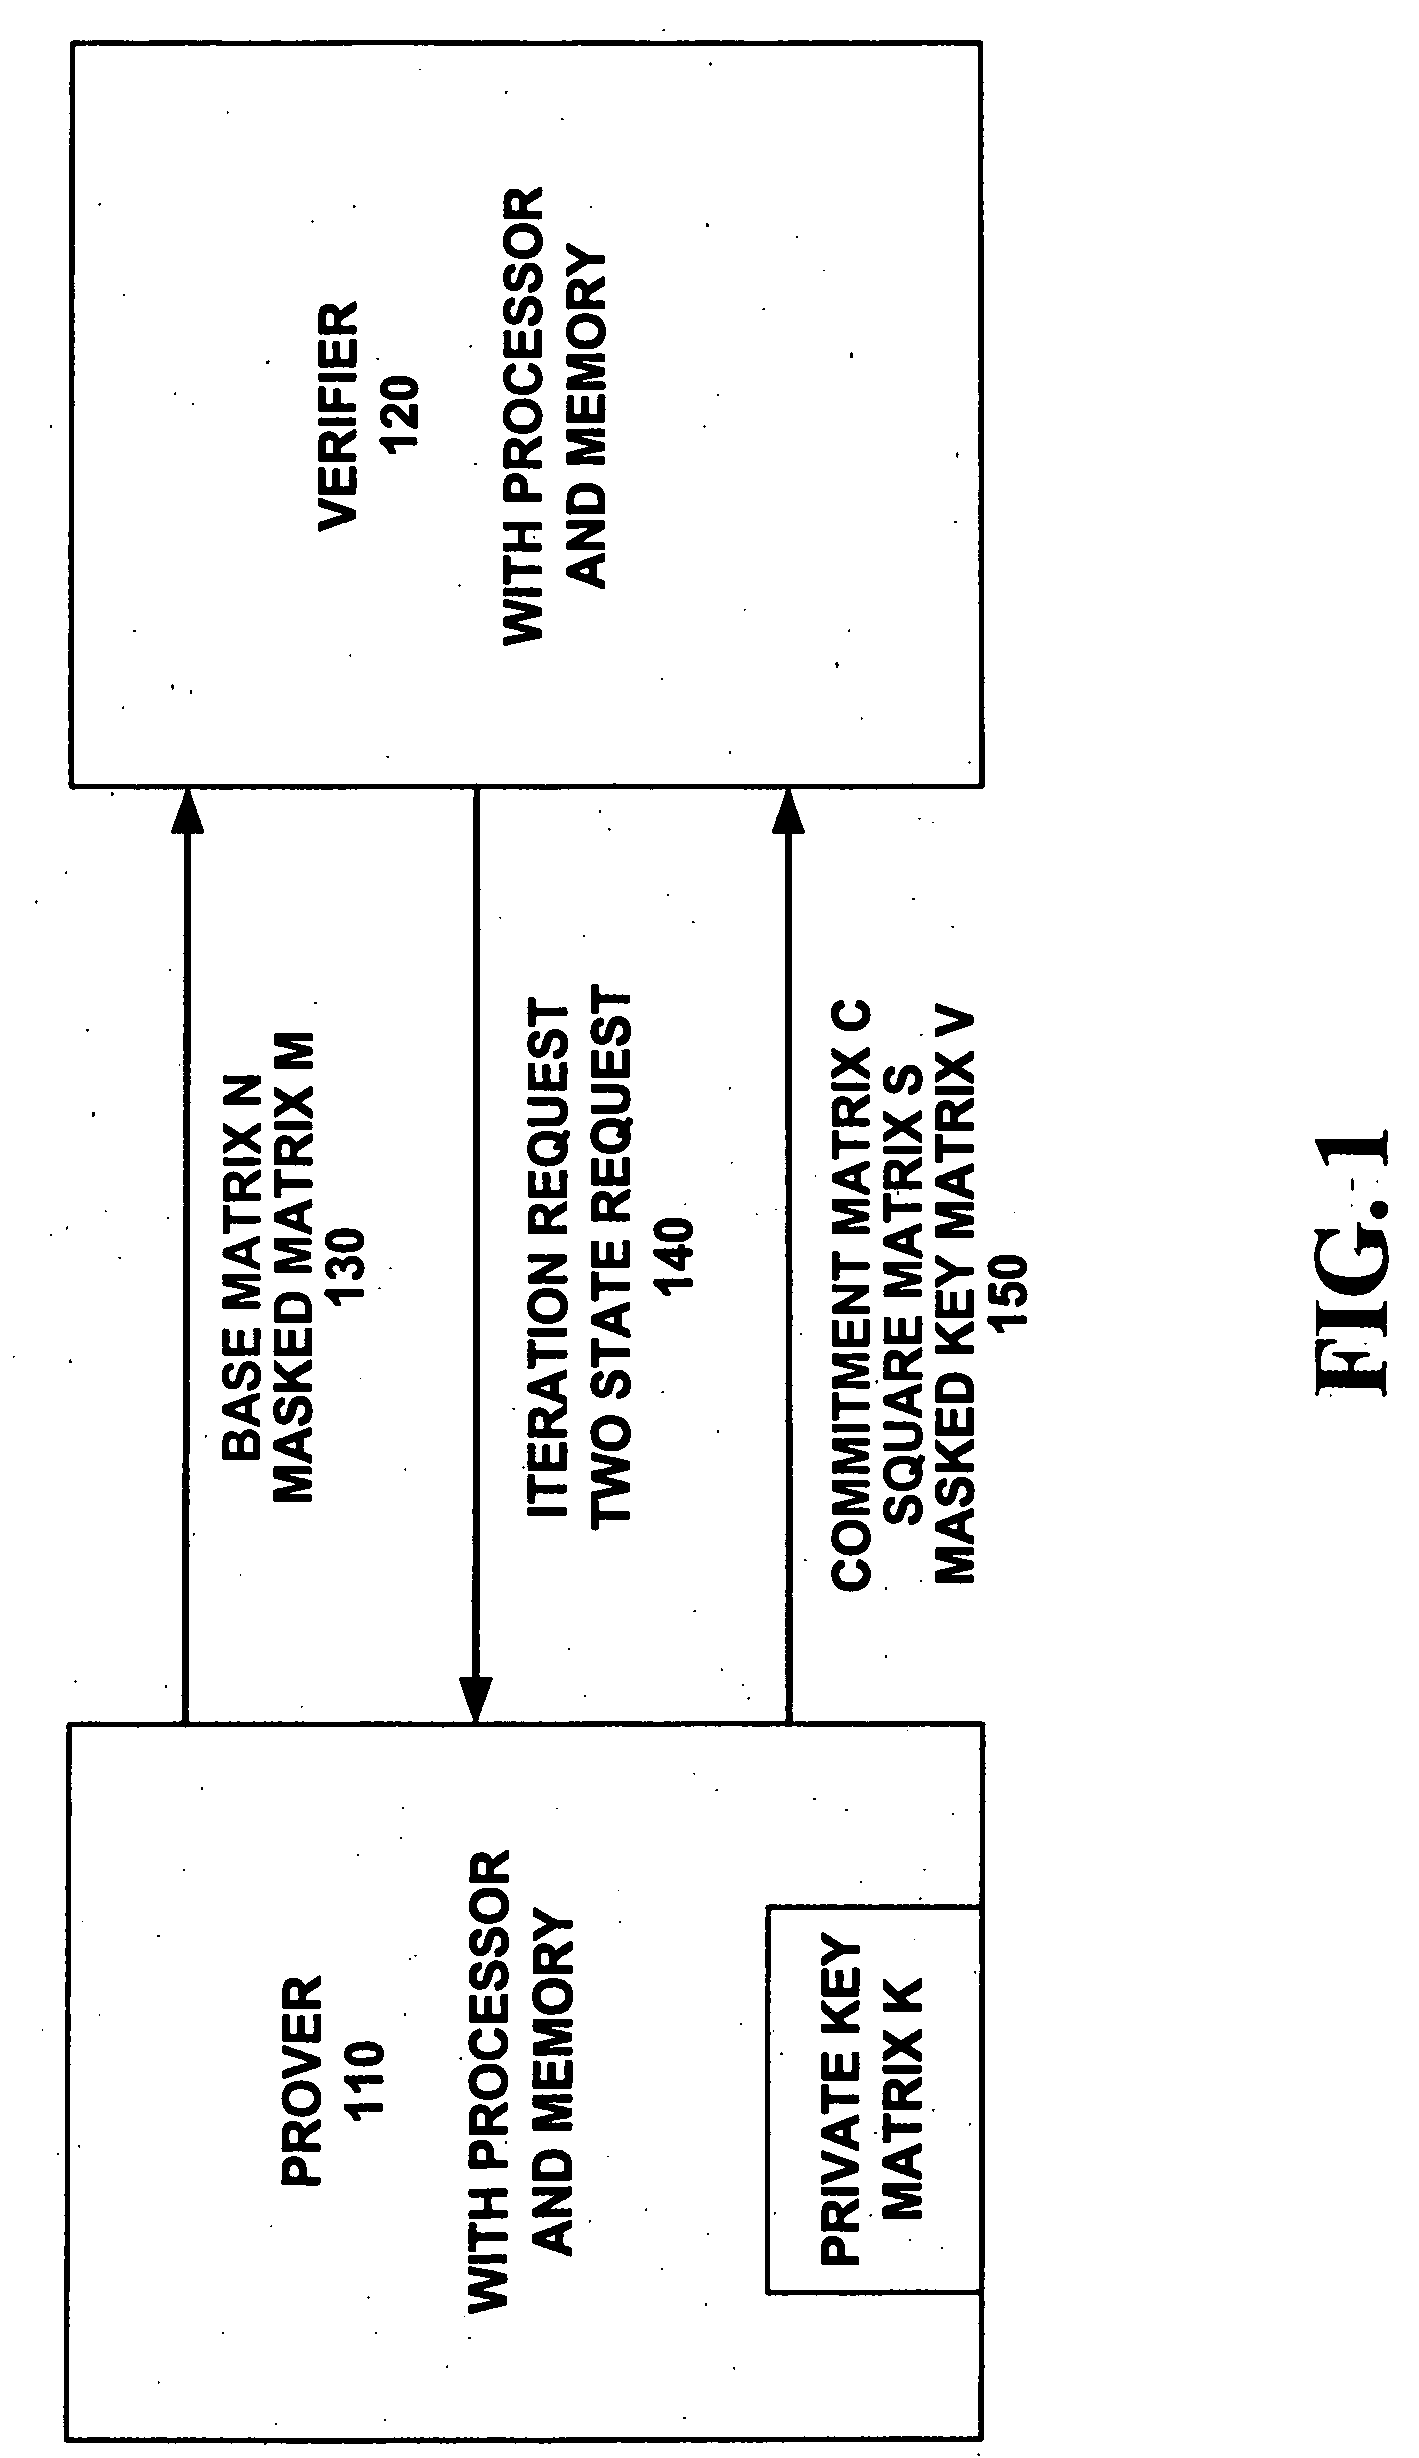 Method for zero-knowledge authentication of a prover by a verifier providing a user-selectable confidence level and associated application devices